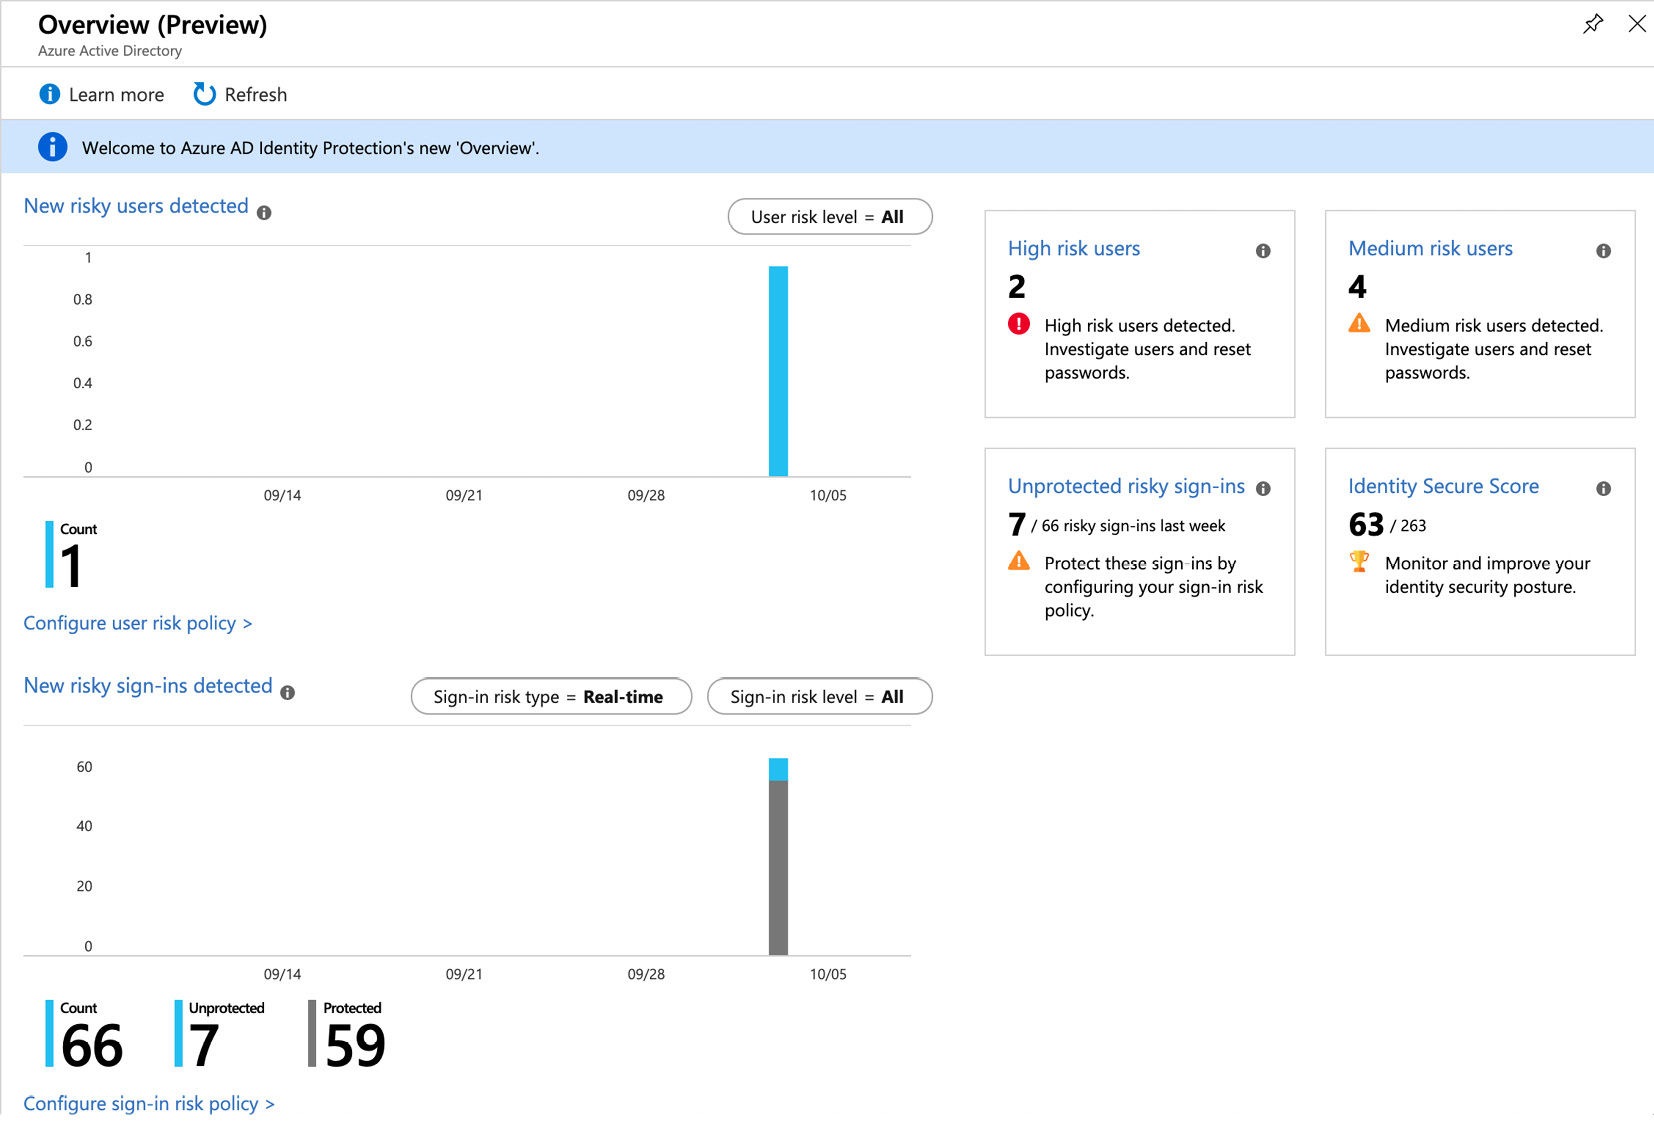 Figure. 3.21 - Azure AD Identity Protection Overview dashboard
